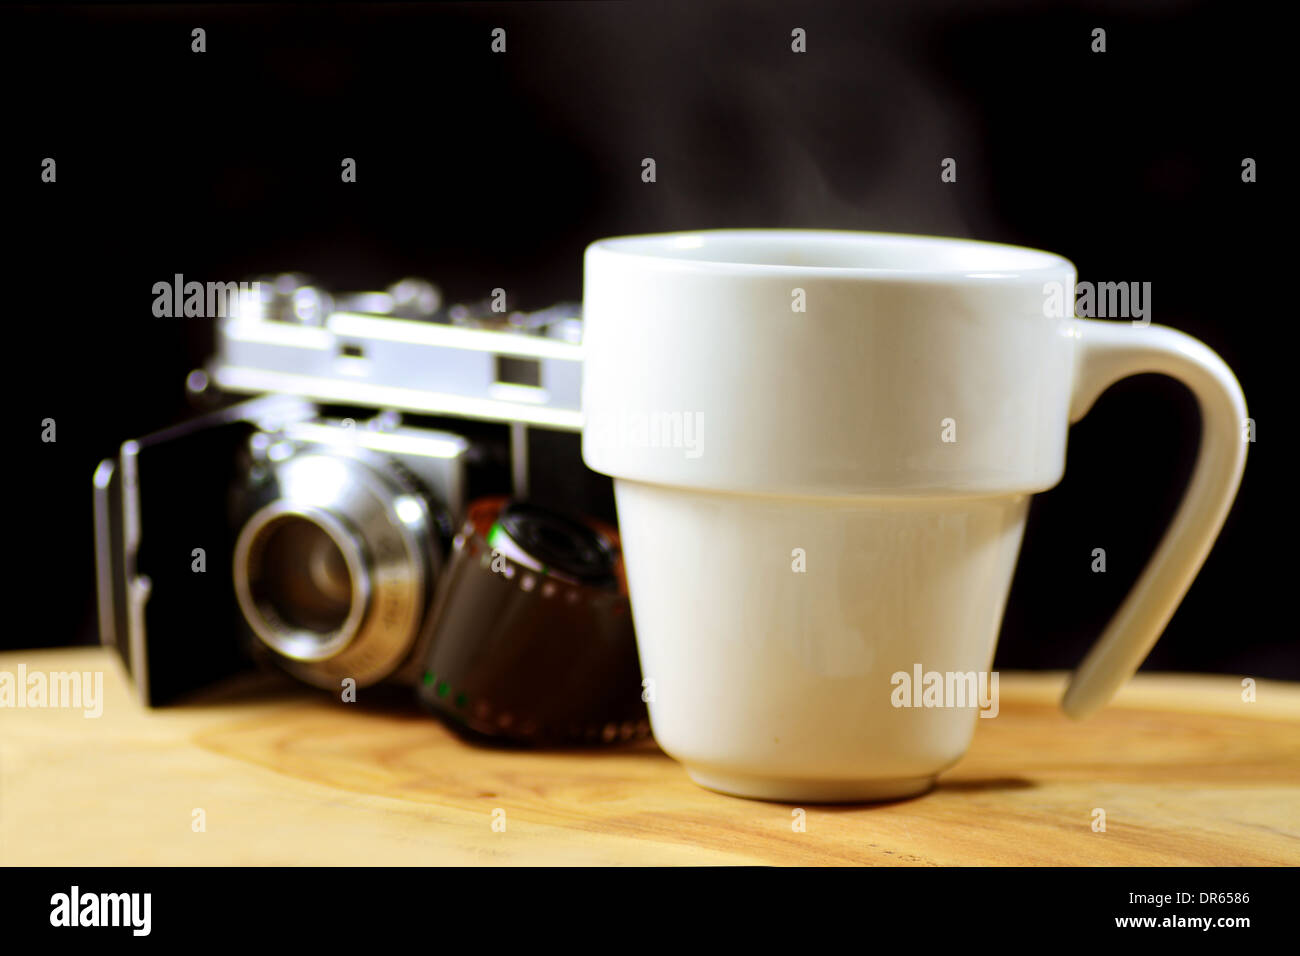 Macro shot of a steaming cup of coffee with an analog camera and roll of film in the background Stock Photo